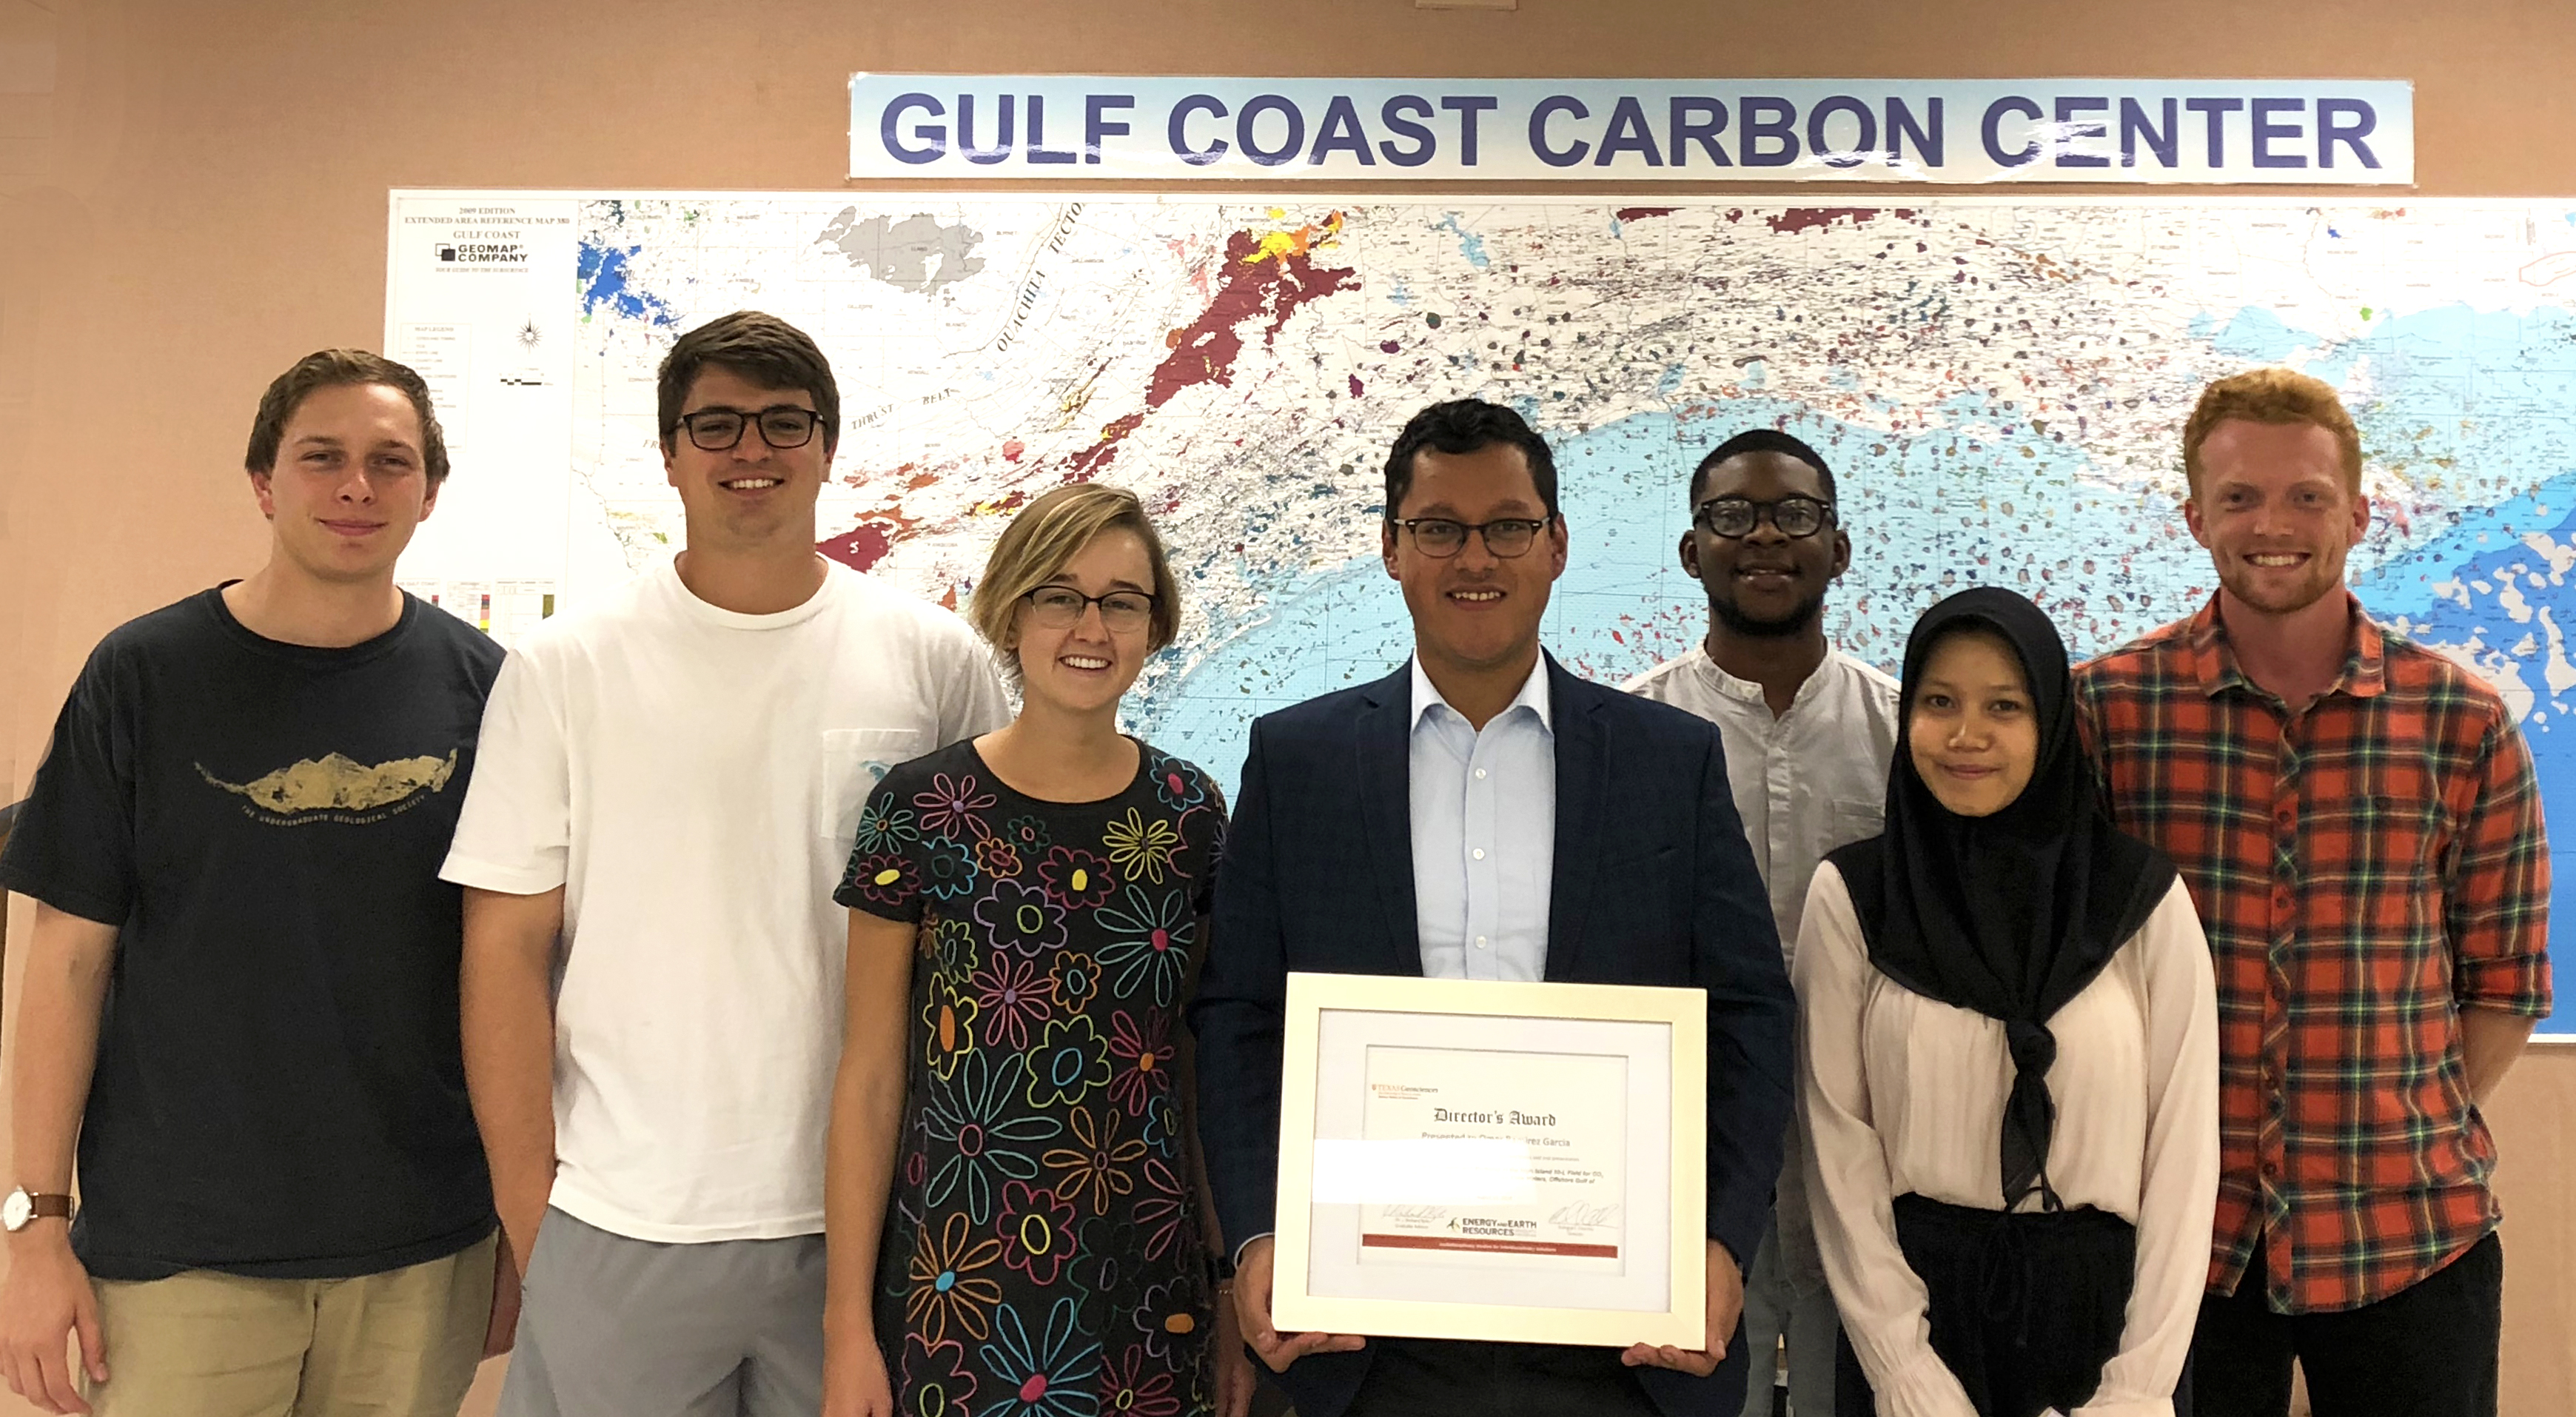 Omar stands in the middle of the incoming master's graduate students with his director's award for excellent thesis and Margaret, an undergraduate researcher